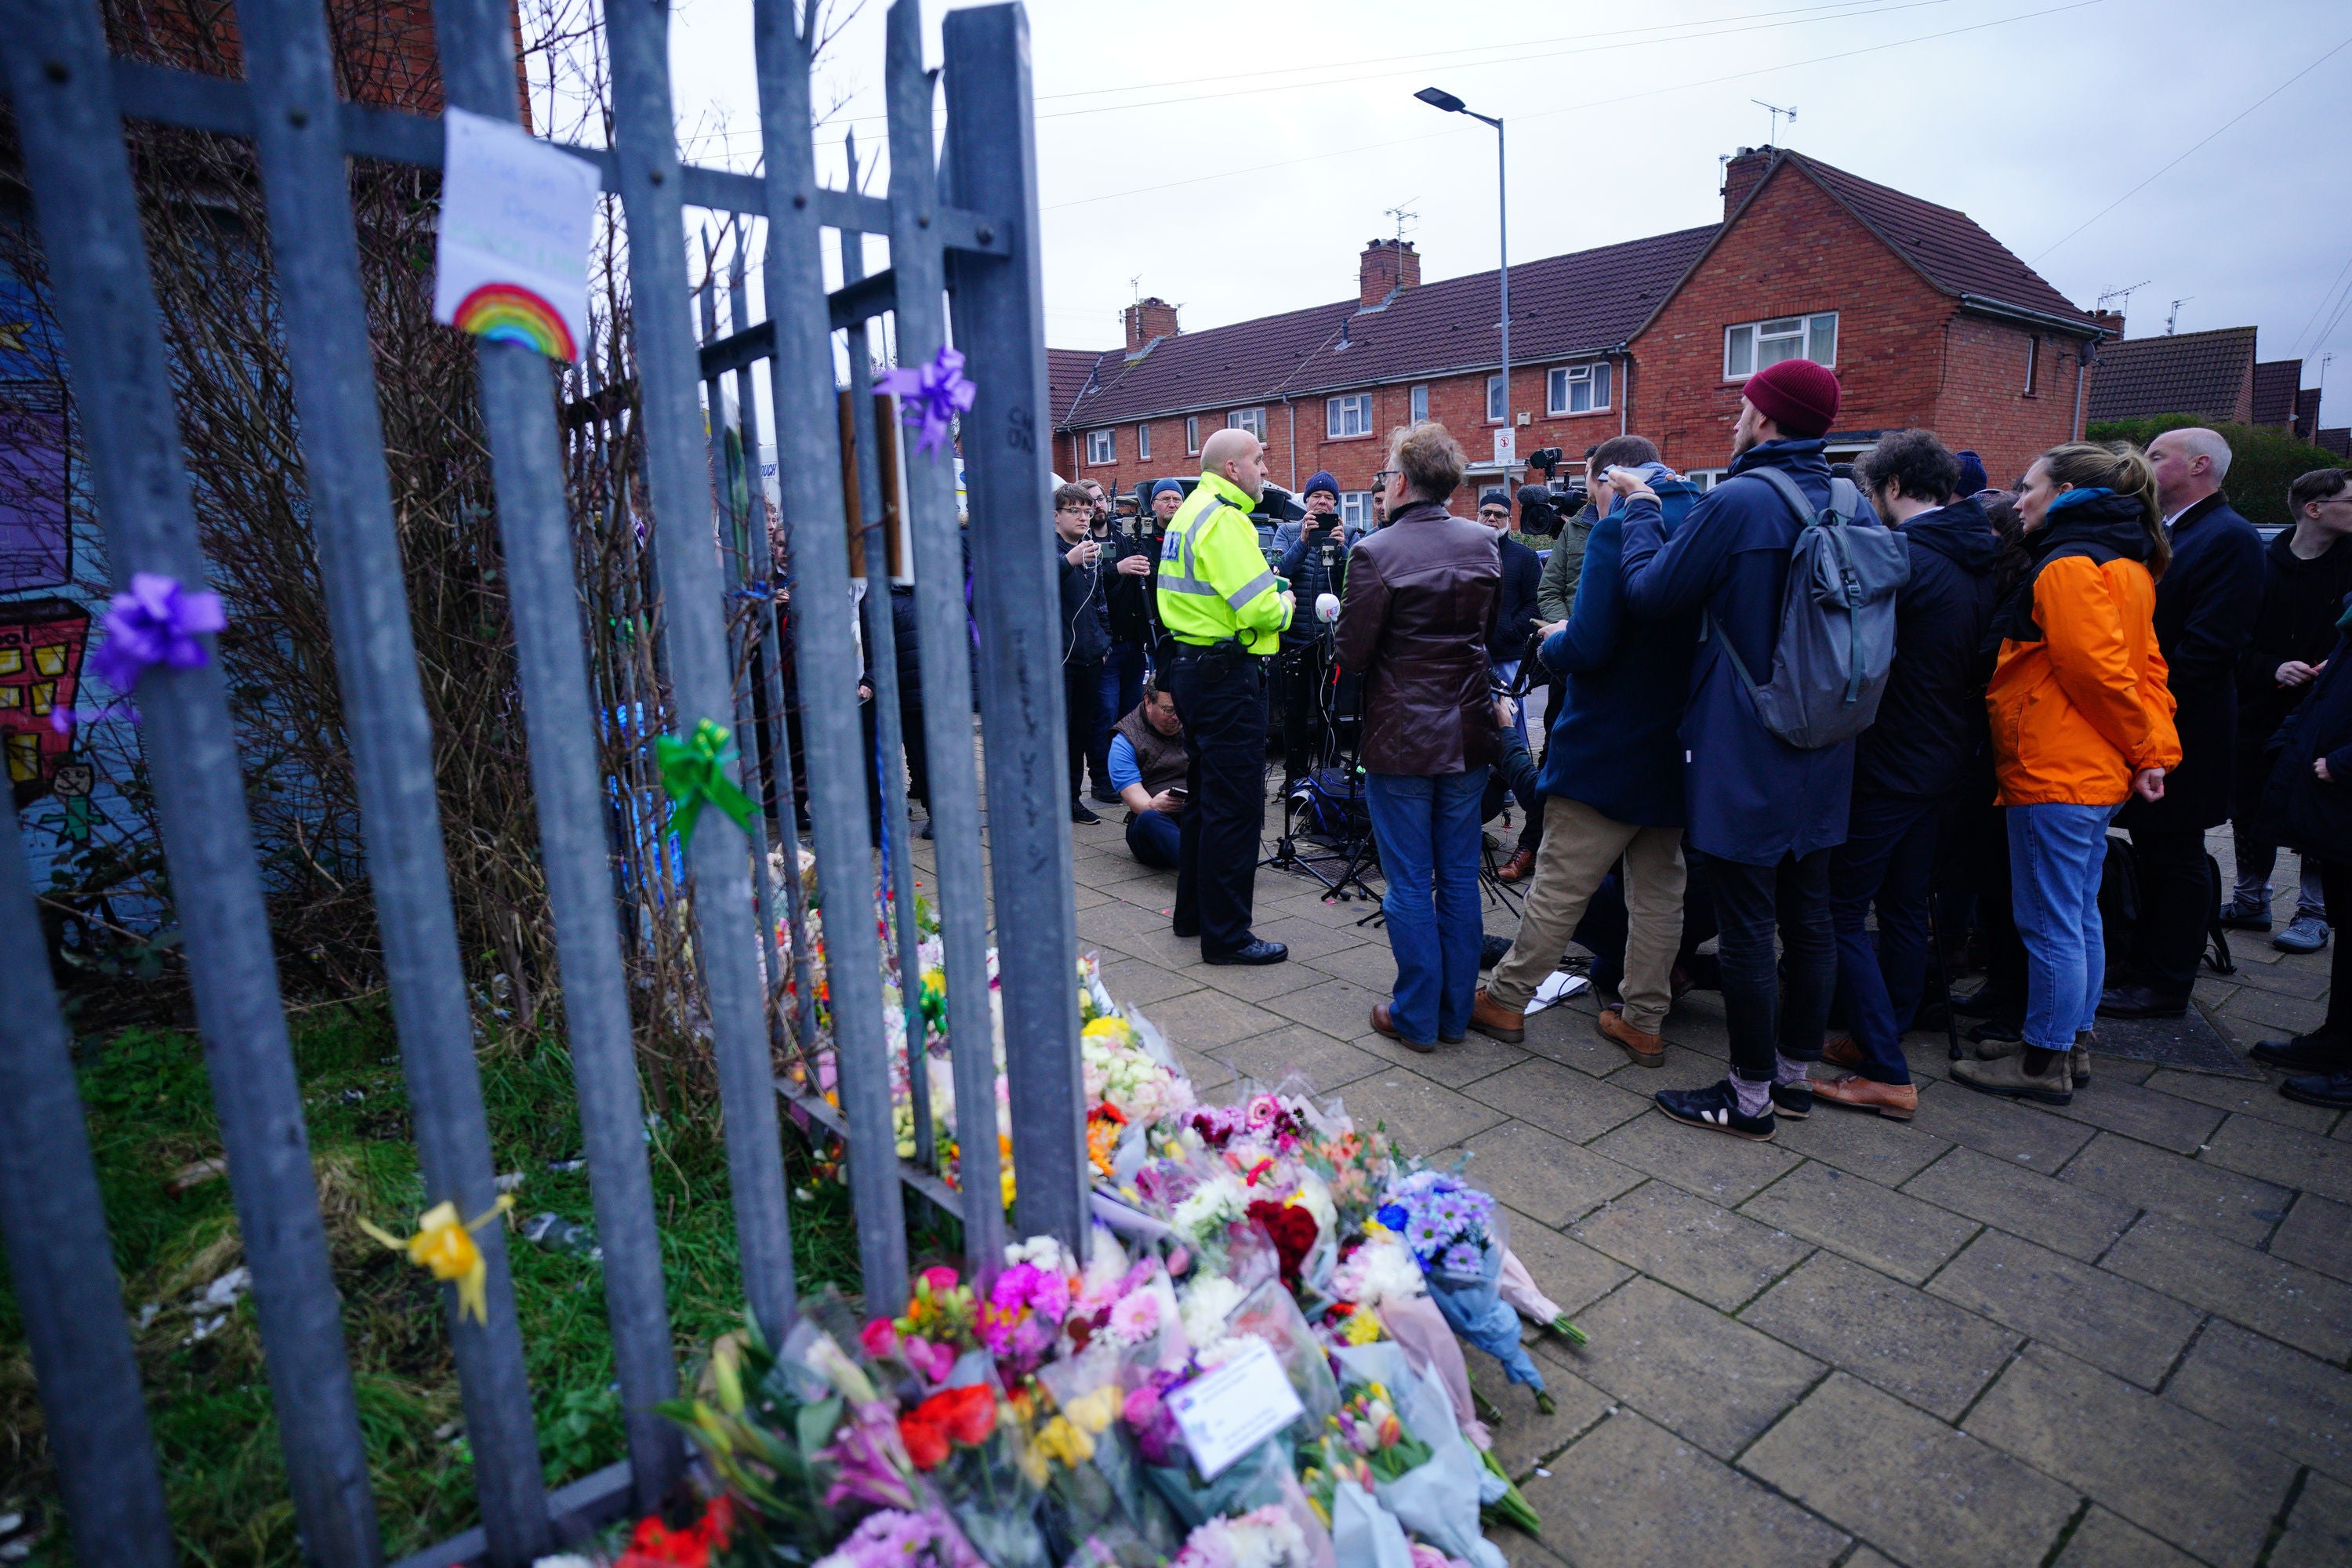 The community in mourning gather at the scene in Knowle West